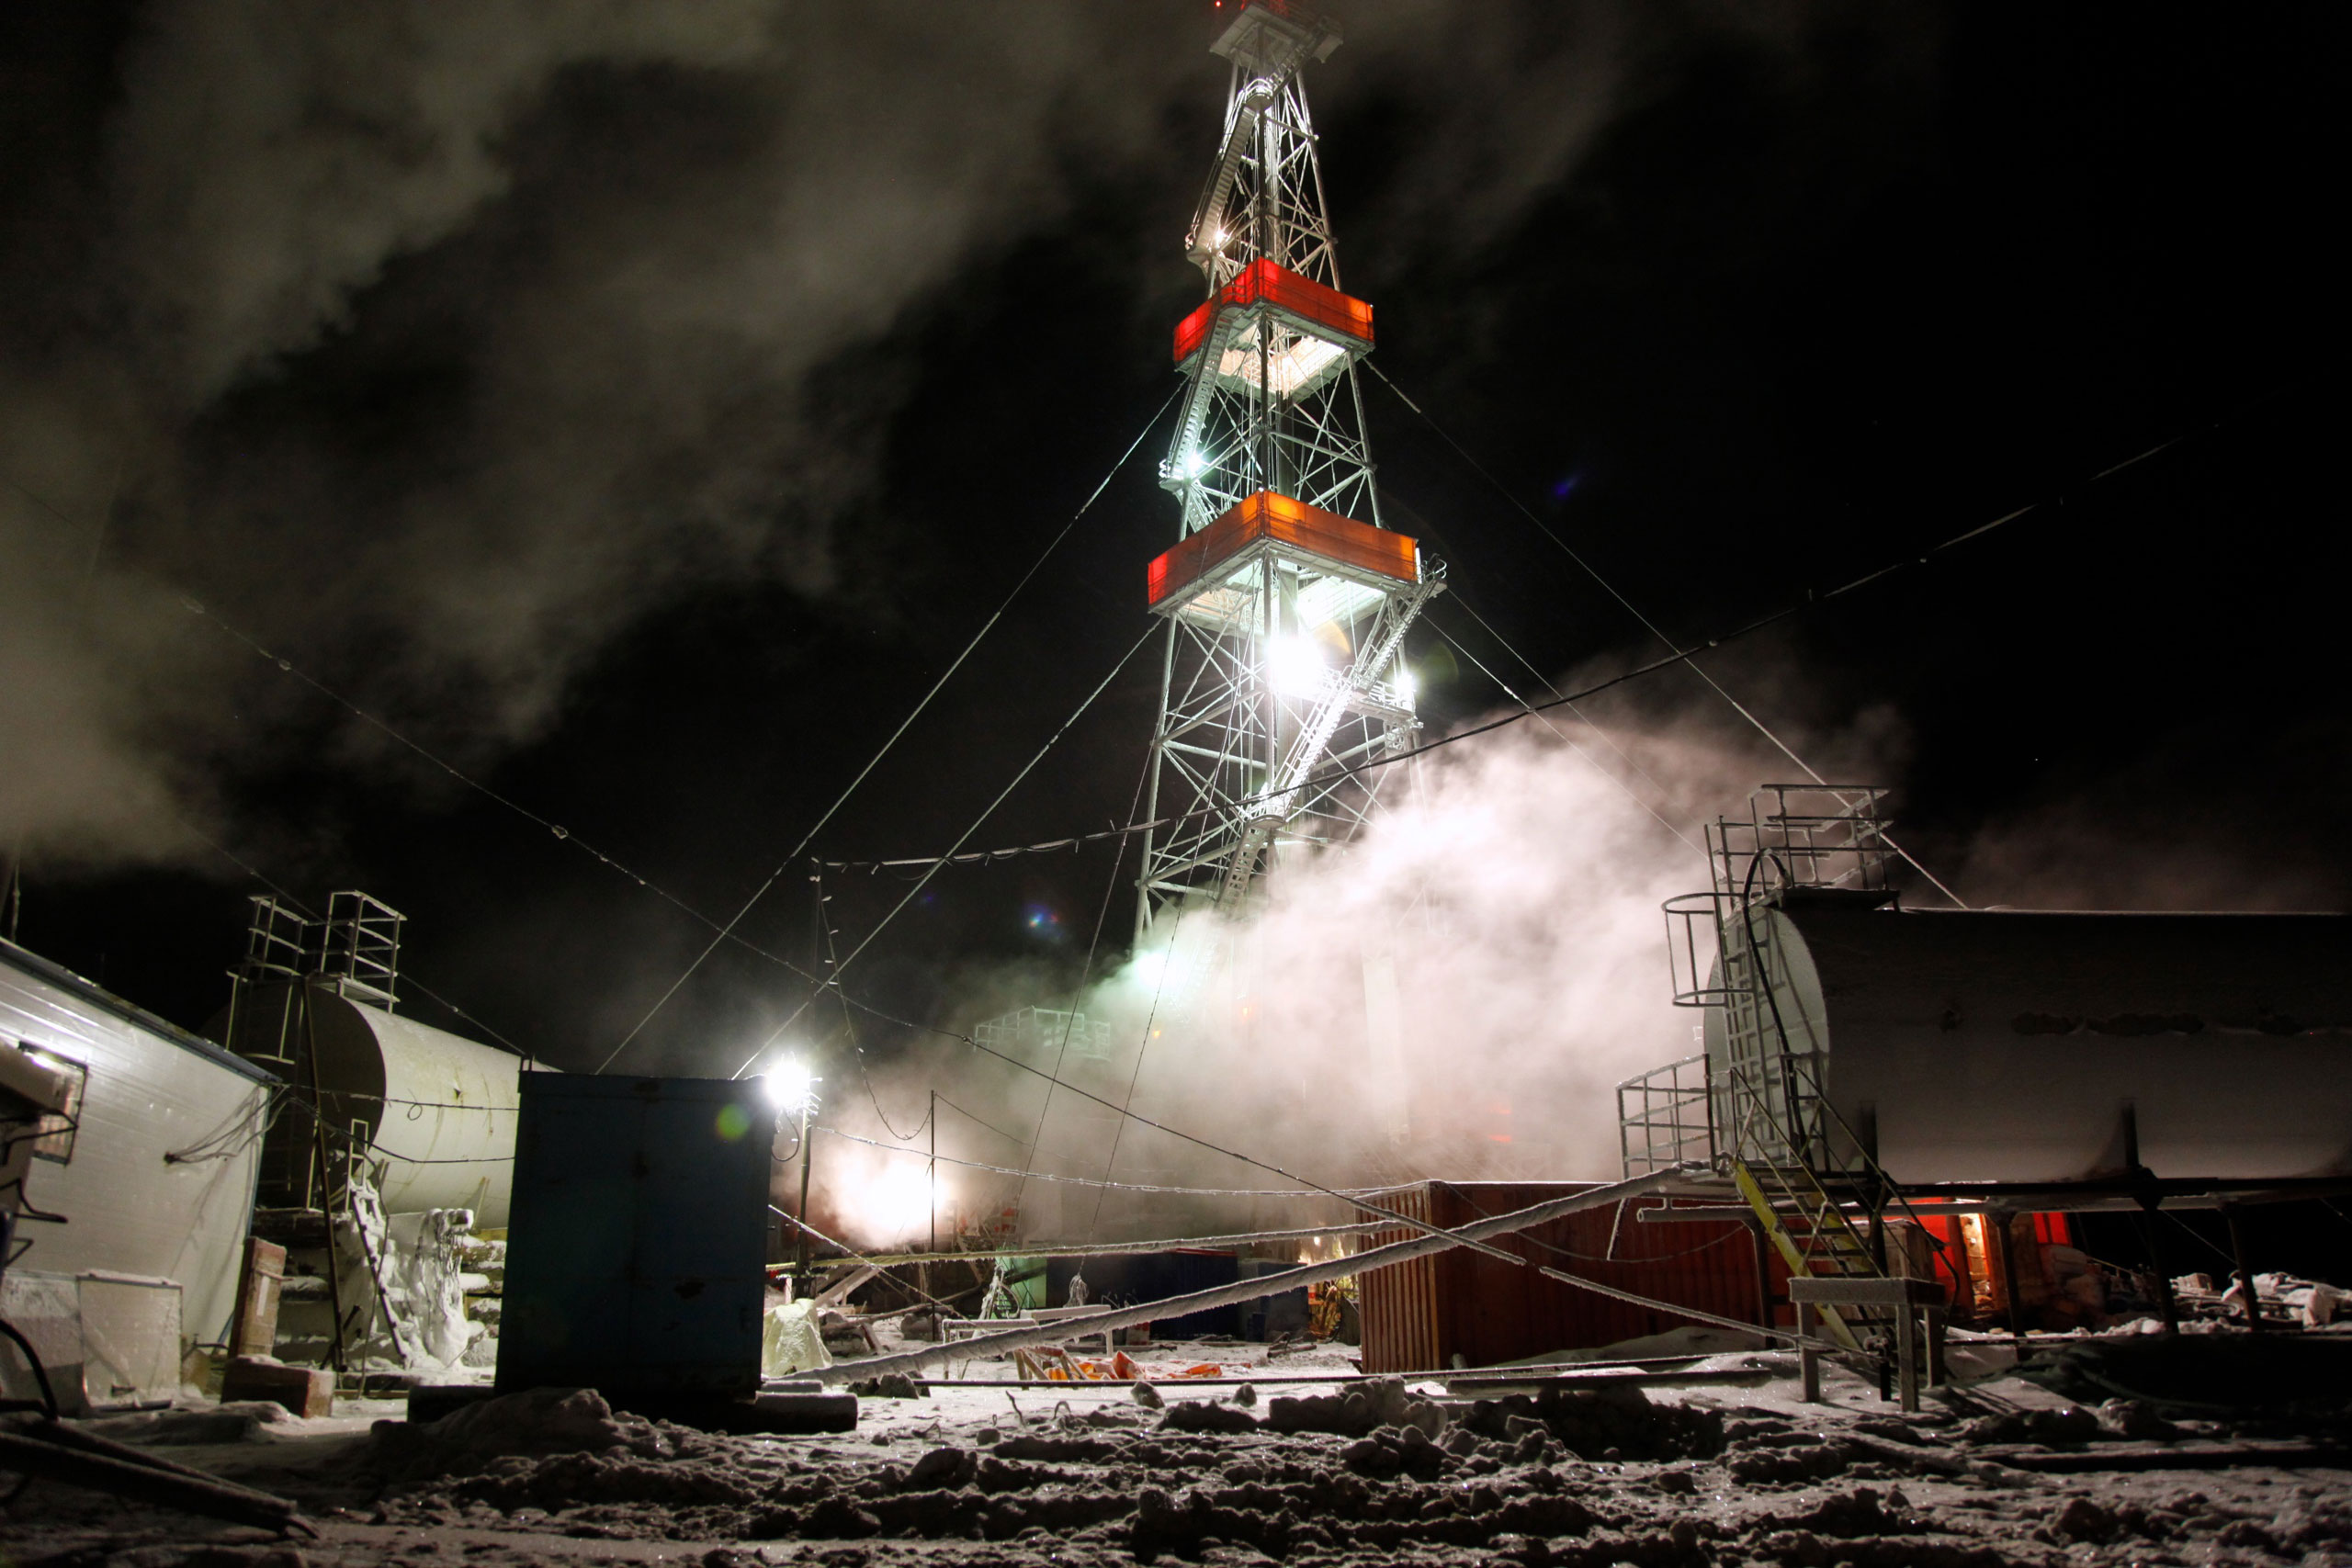 A gas drilling facility at the Kumzhinskoe gas field located in the delta of Pechora River in the Nenets Autonomous Region, said by environmentalists to be disaster-prone, February 2011.